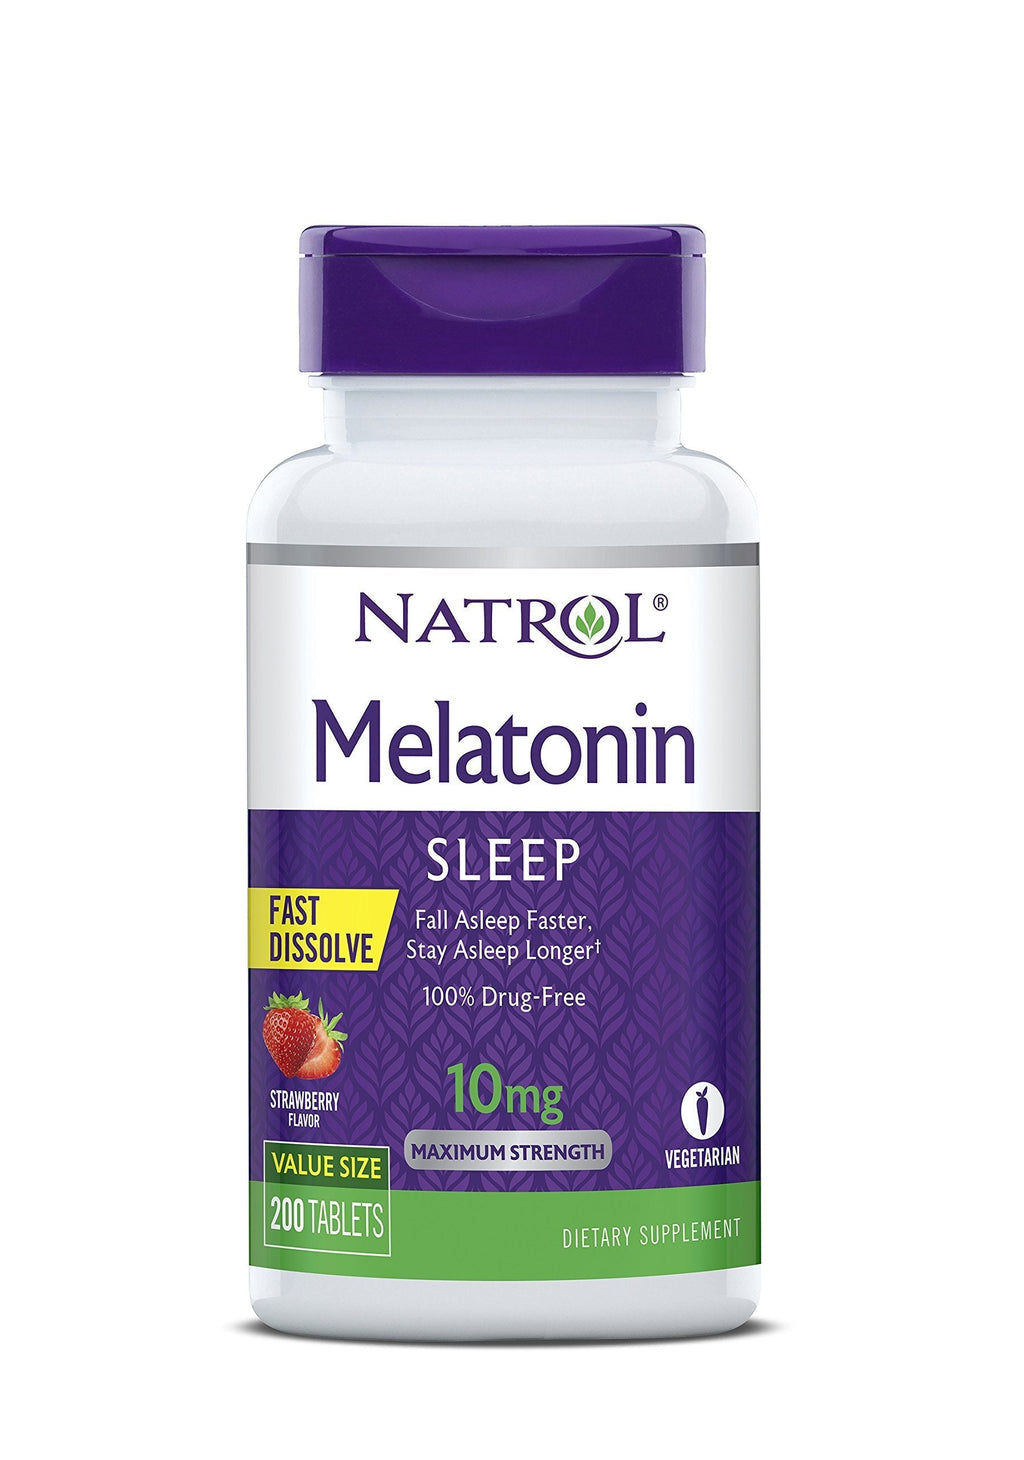 Natrol Melatonin Fast Dissolve Tablets, Help You Fall Asleep Faster, Stay Asleep Longer, Easy to Take, Dissolve in Mouth, Strengthen Immune System, Maximum Strength, Strawberry Flavor, 10mg, 200 Count 200 Count (Pack of 1) - BeesActive Australia